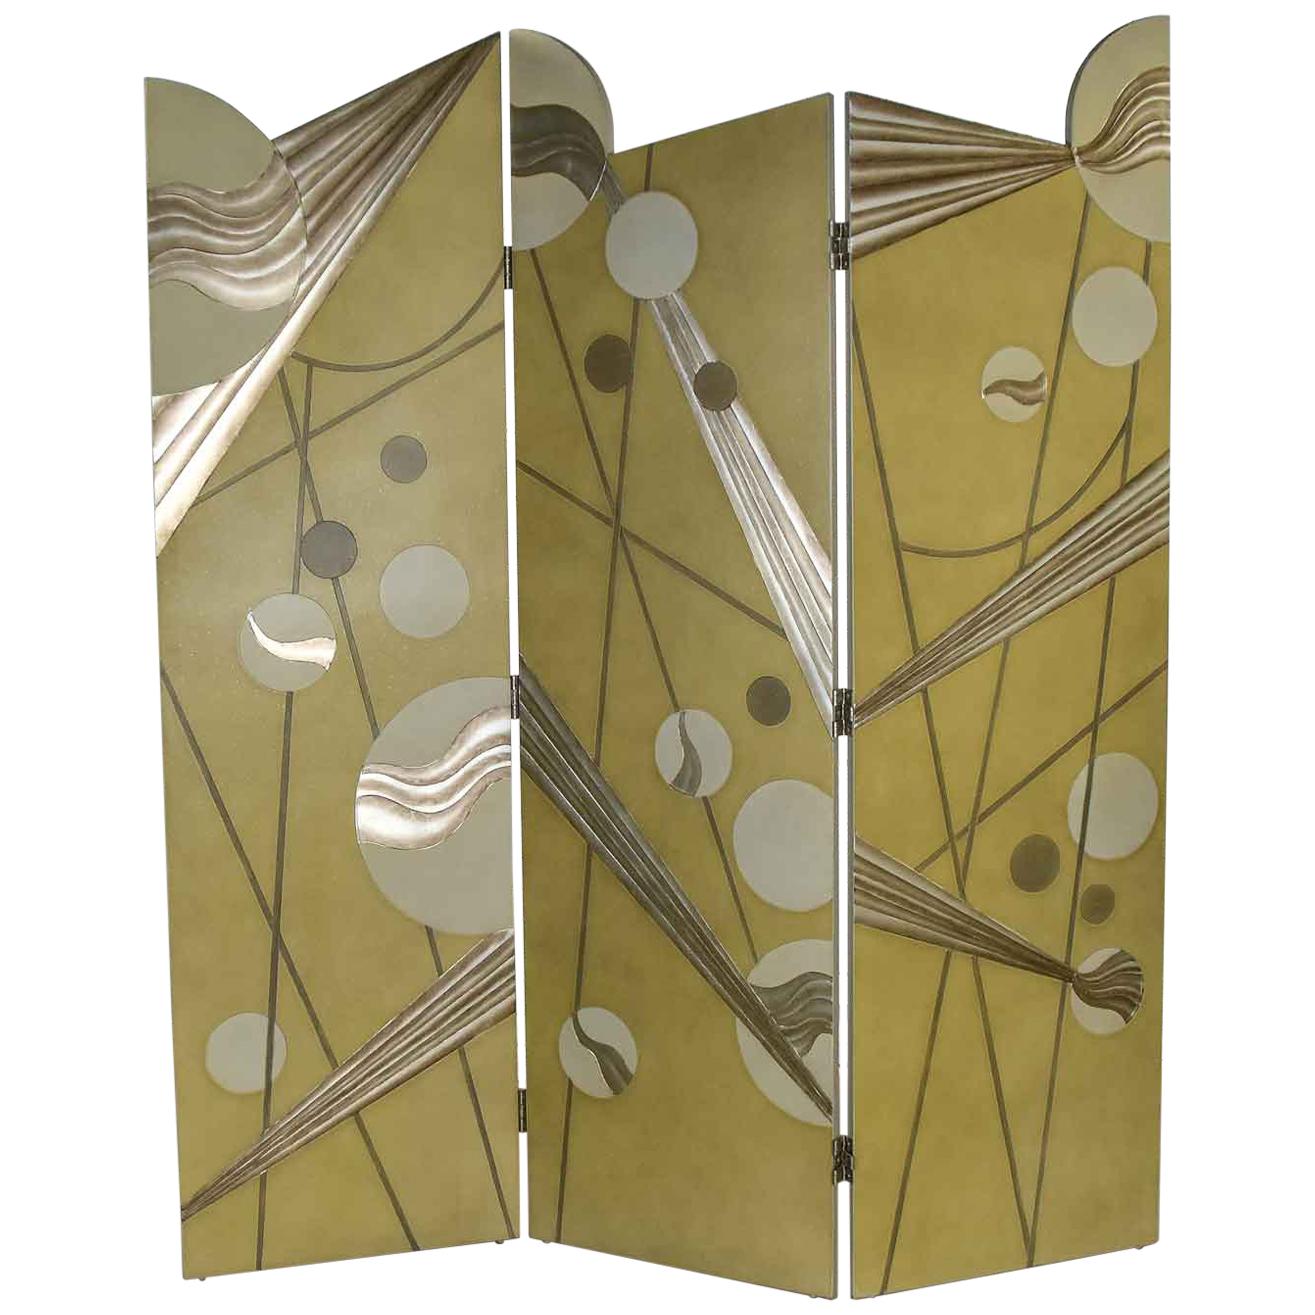 Art Deco Revival 3-Panel Folding Screen or Room Divider Gold Silver and Bronze